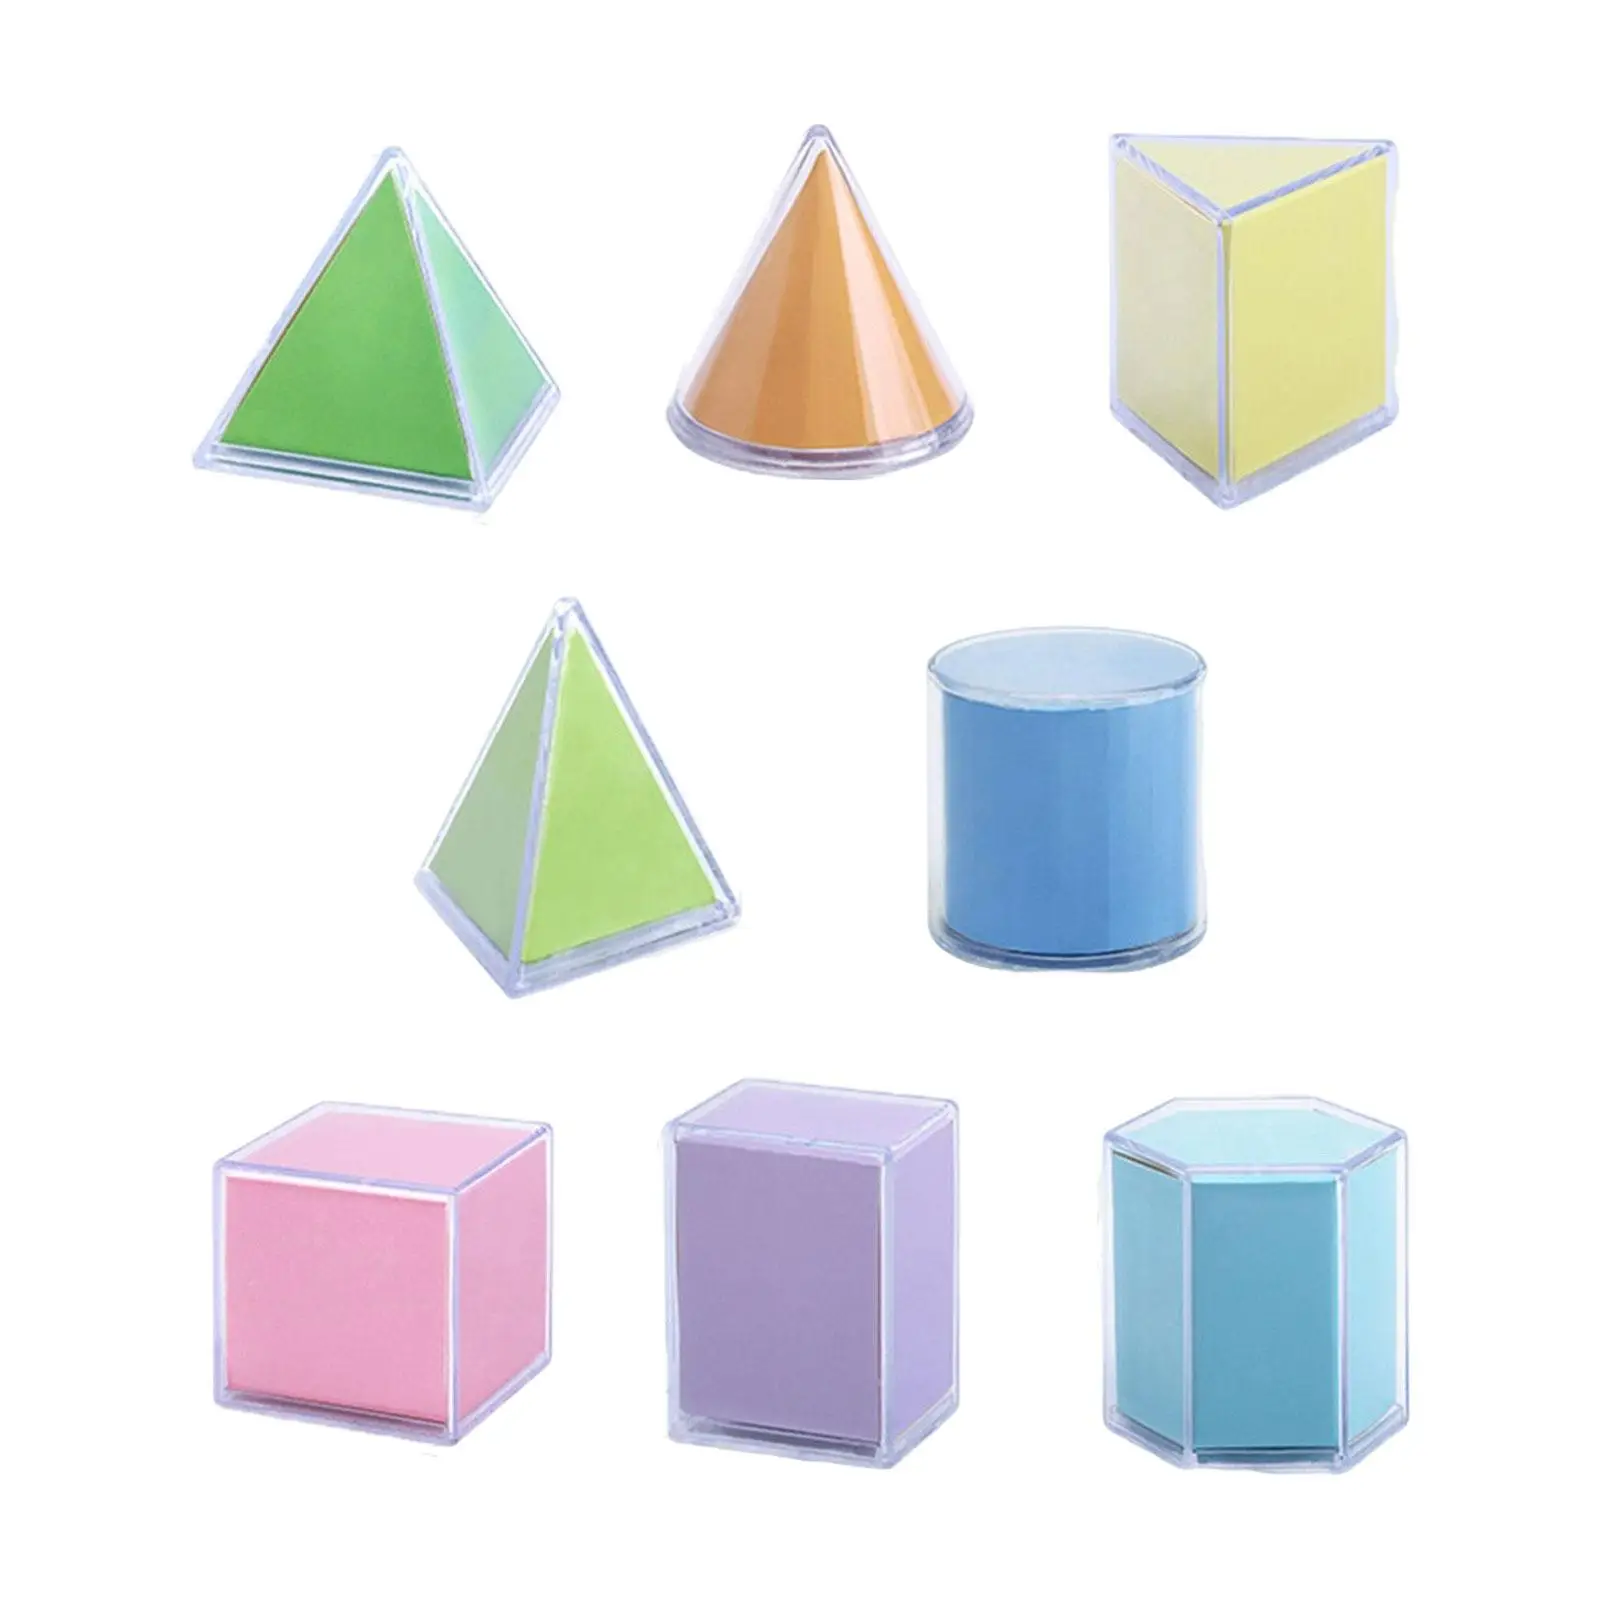 8x Geometric Shapes Blocks Educational Toy Math Toys Learning Toys for Toddler